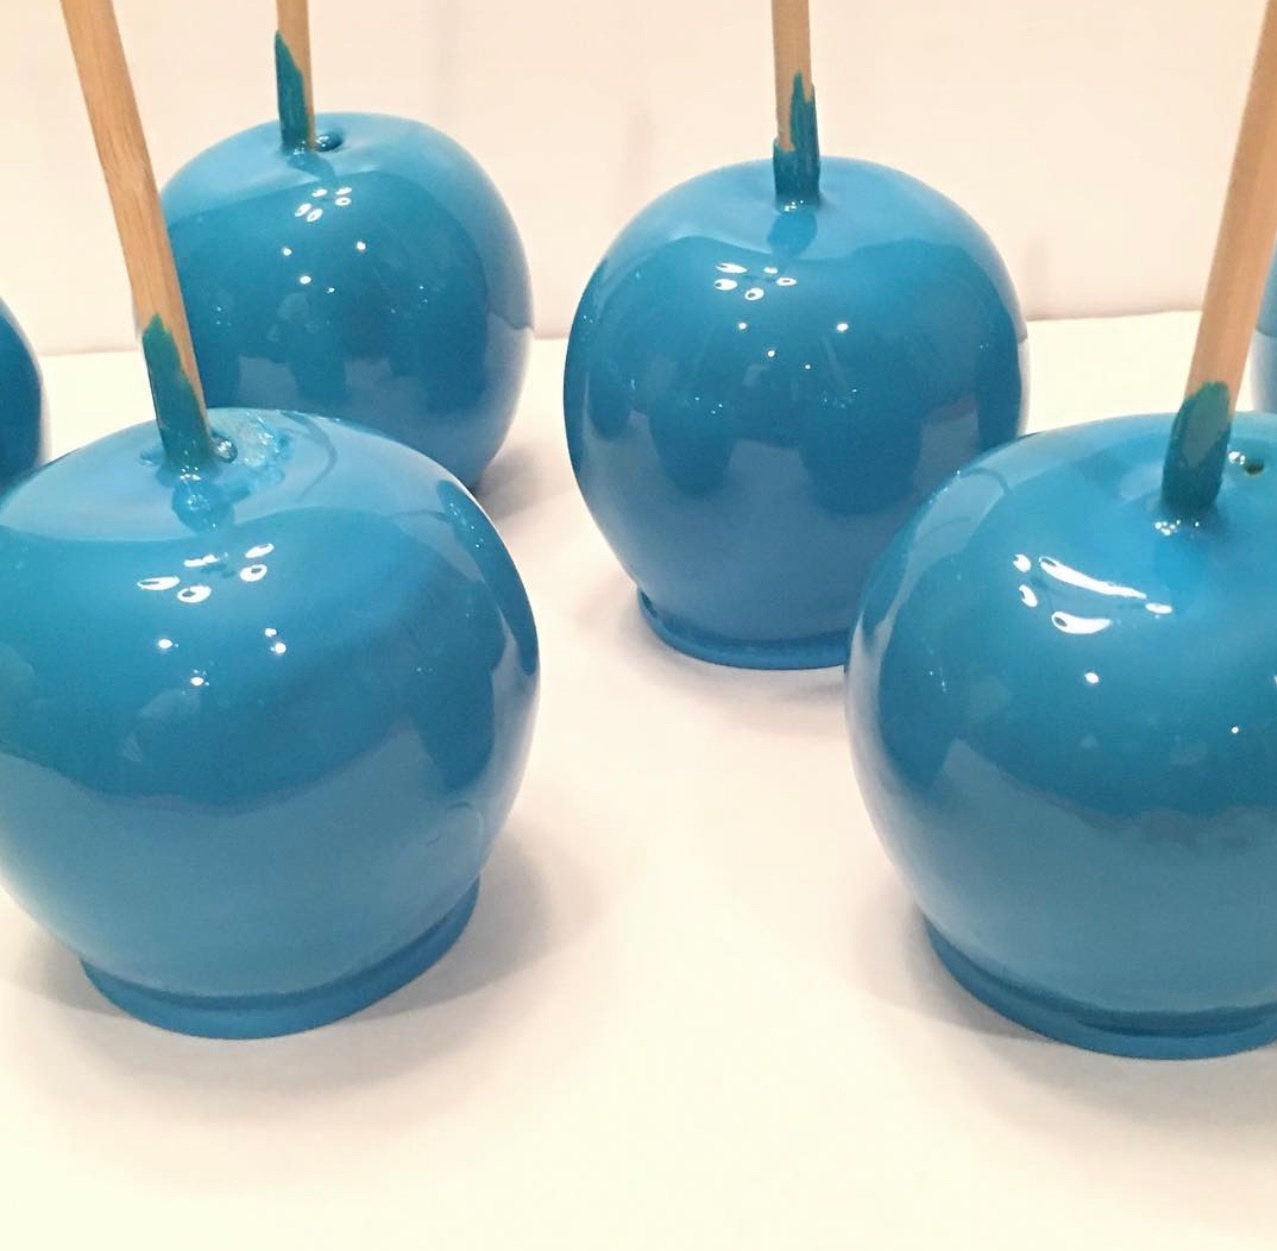 Sky Blue Candy Apples